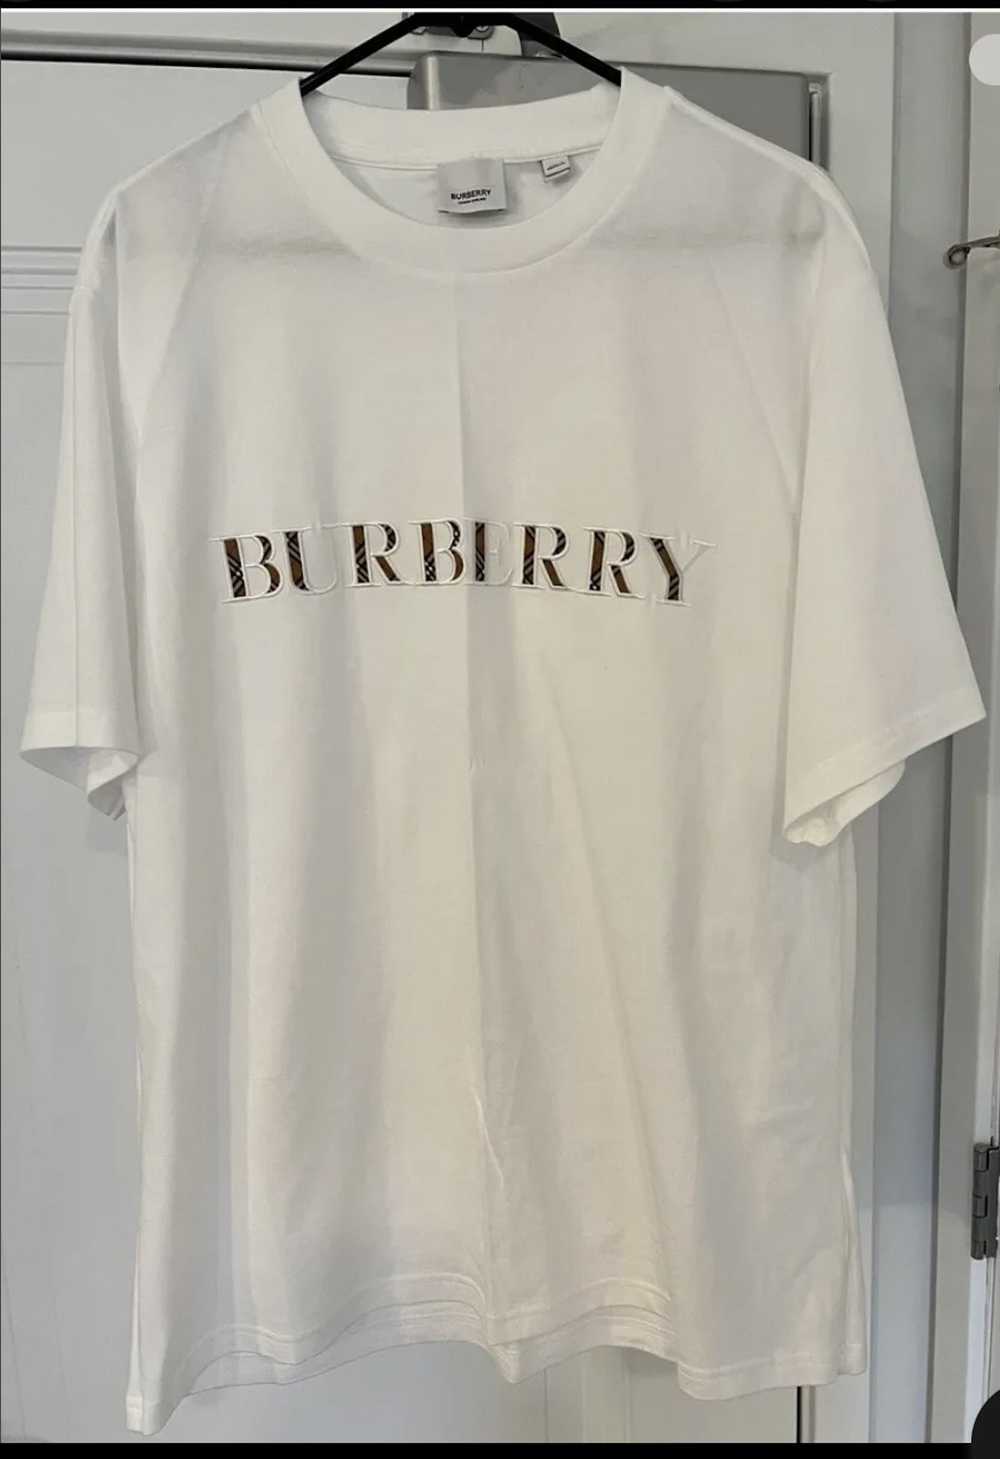 Burberry Burberry t shirt dry clean no stains wor… - image 1